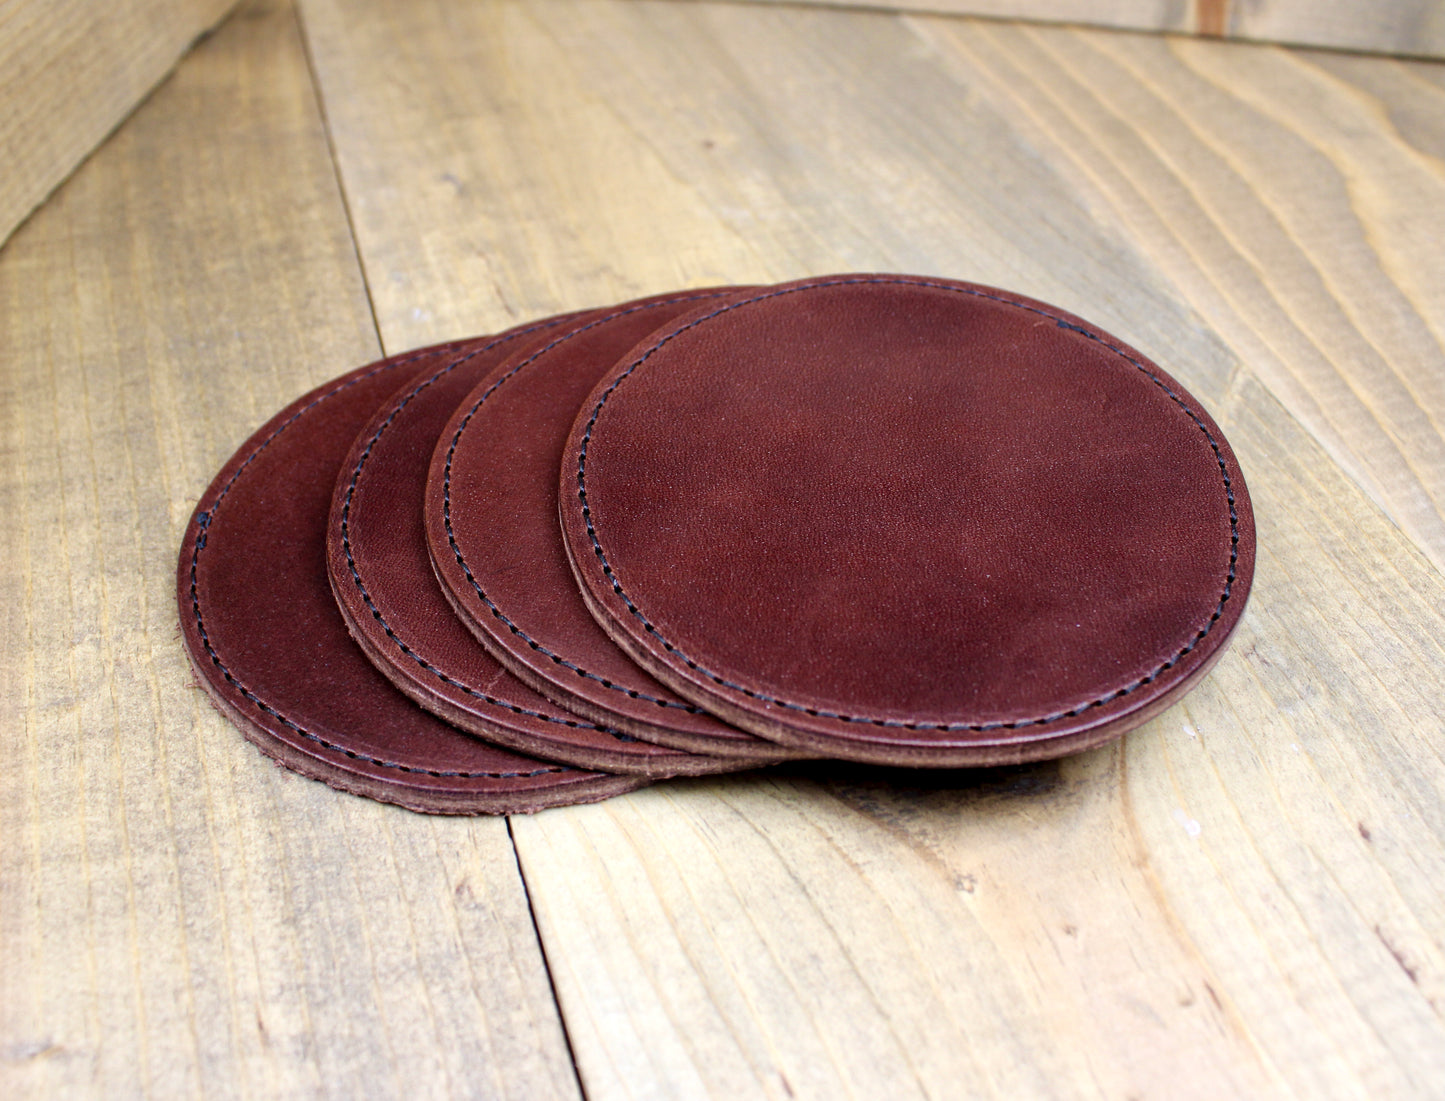 Chocolate Leather Coasters set of 4. 4 pack coasters. handmade coasters. gift for men. 3rd anniversary gift. leather gift men. coasters handmade. round coasters. personalized coasters. 